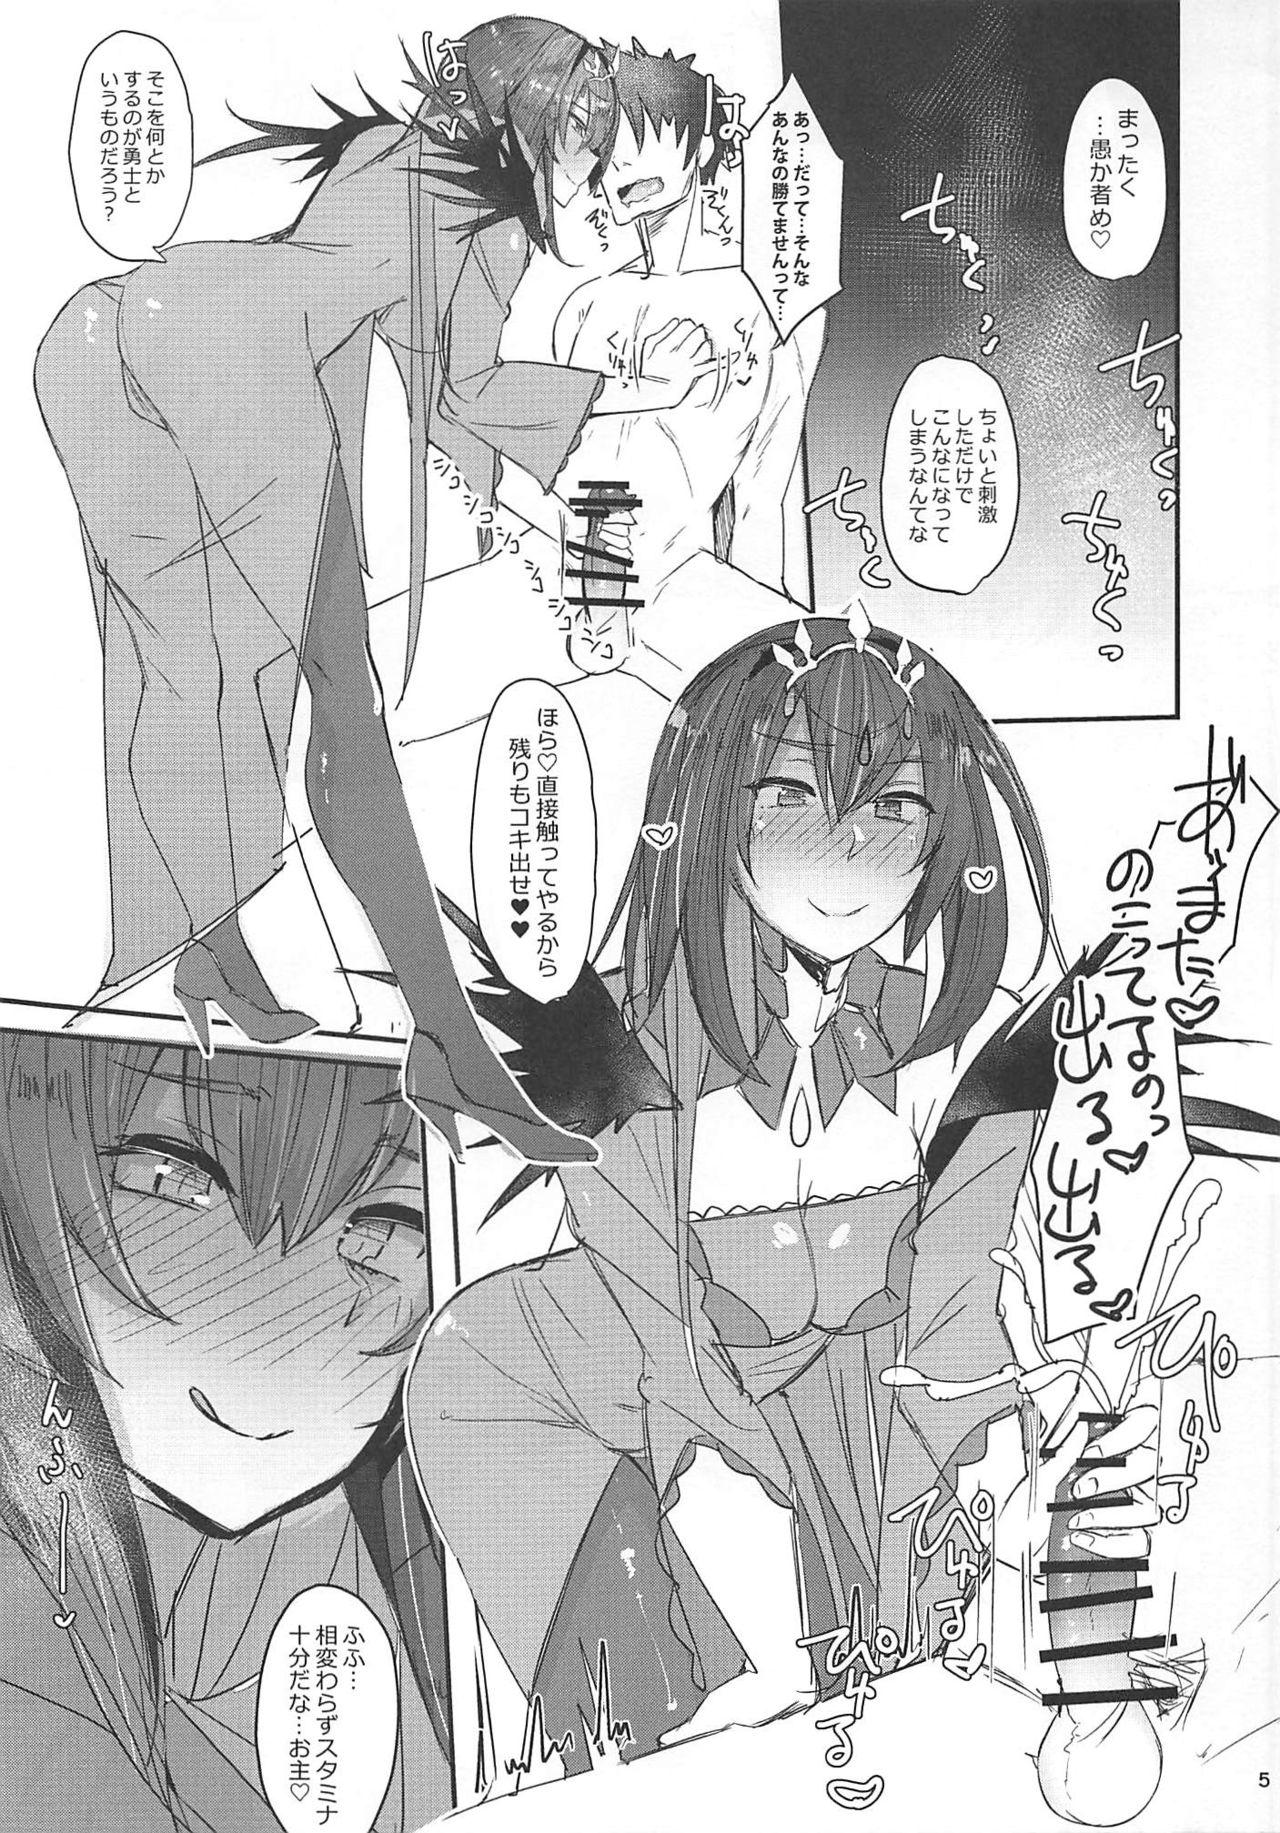 Hijab Funde Scathach-sama - Fate grand order Outside - Page 5